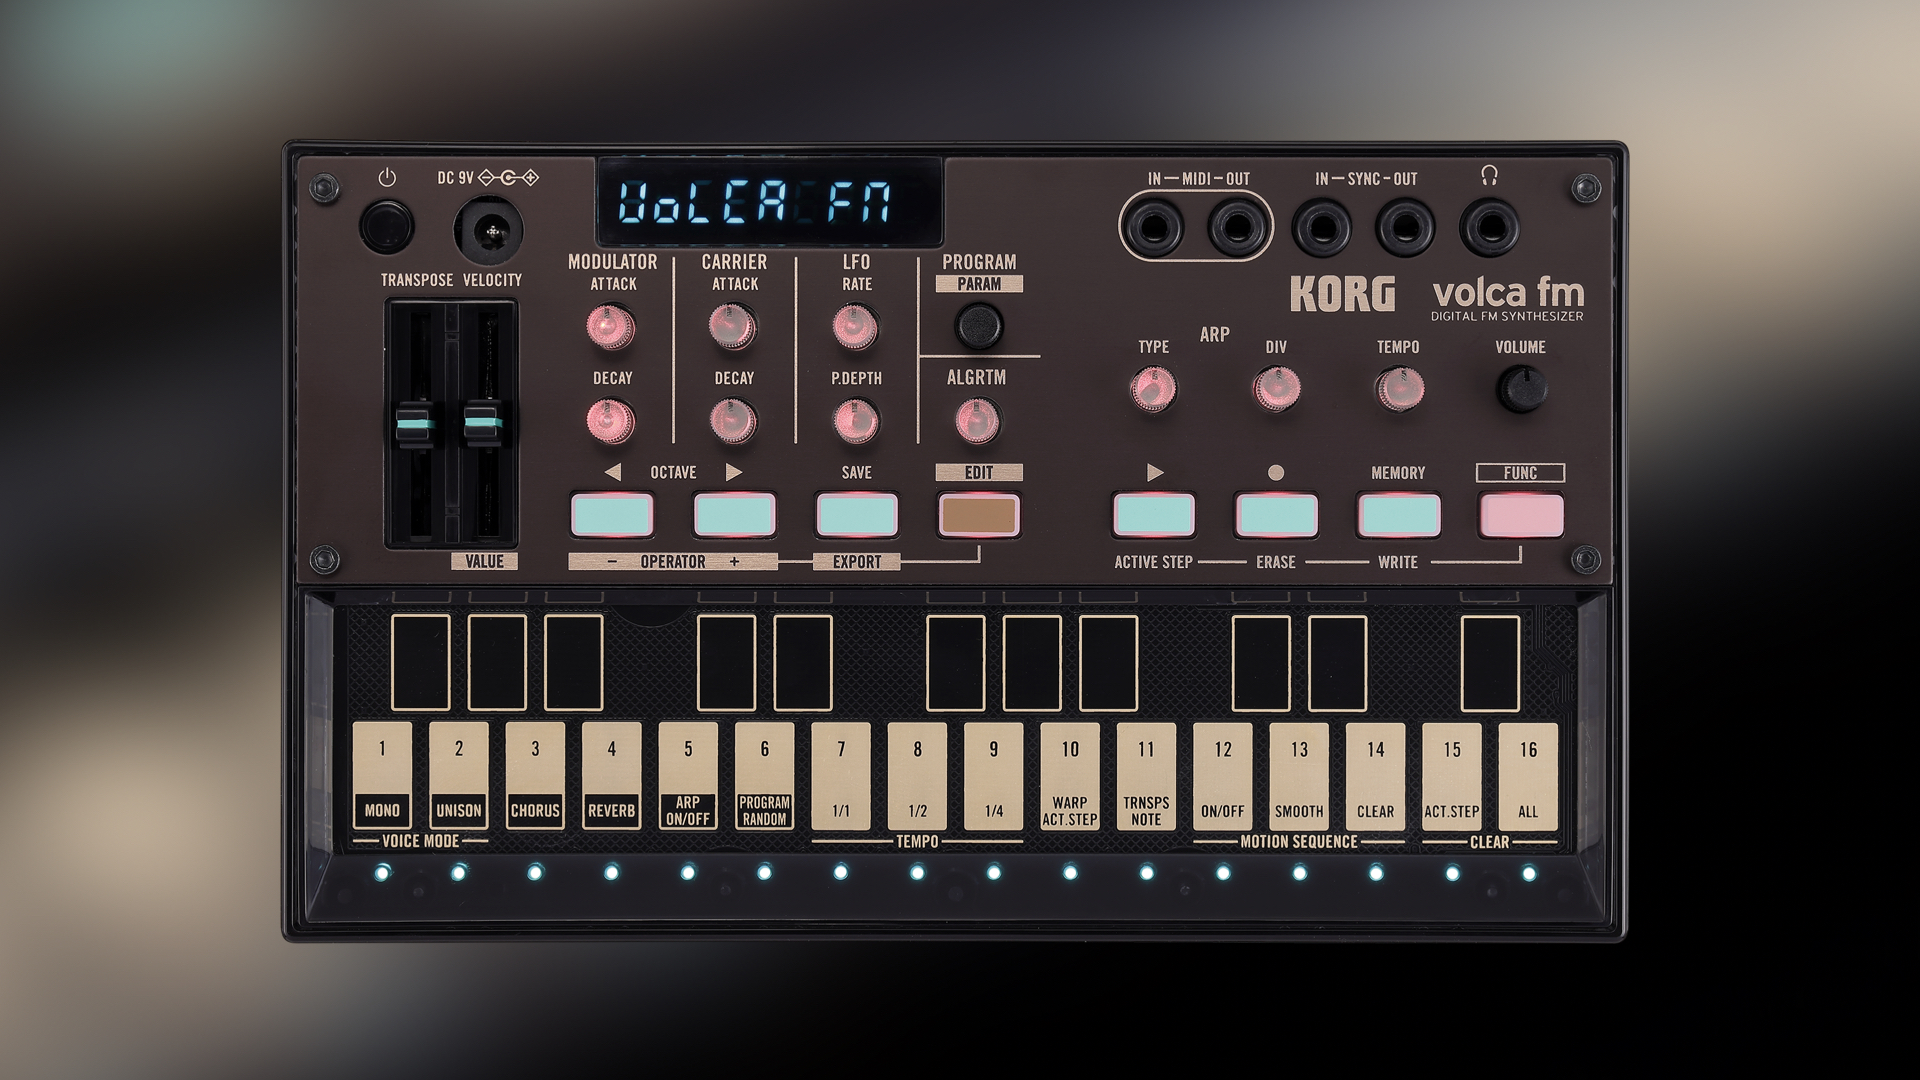 Korg volca FM 2nd Gen with more polyphony, effects and sound memory